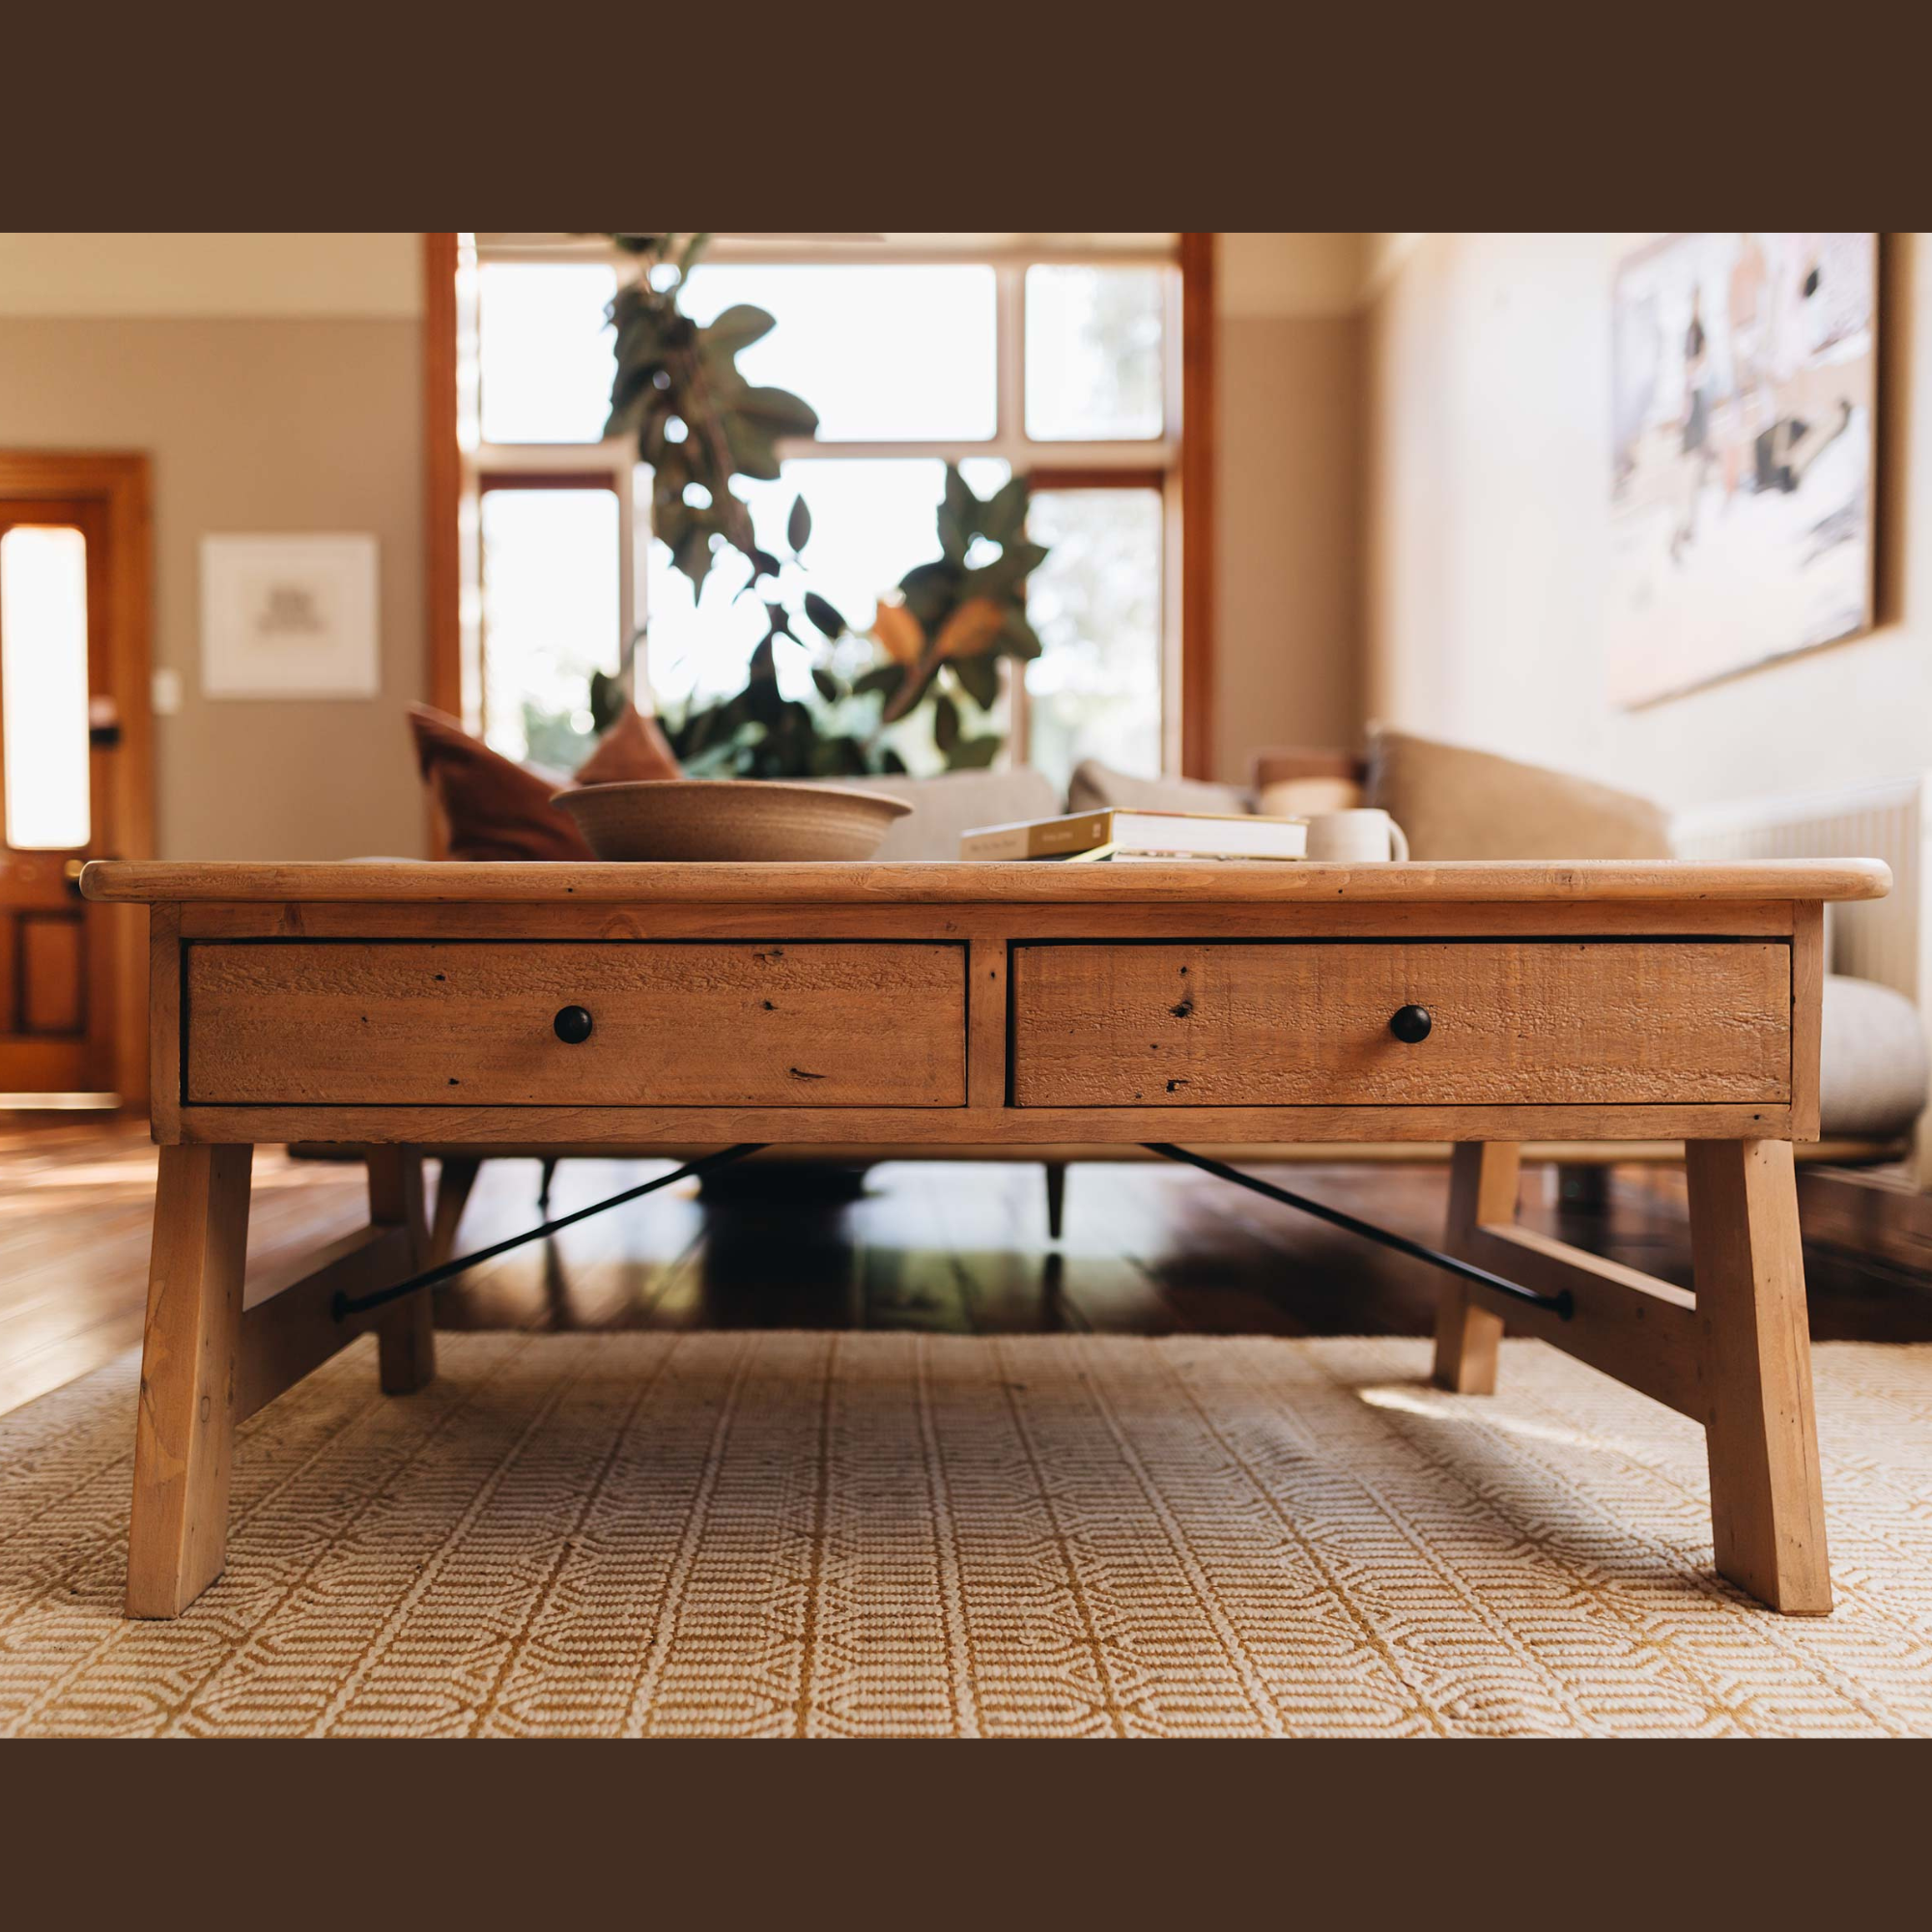 VIKTOR 2 DRAWER COFFEE TABLE | SOLID RECYCLED TIMBER